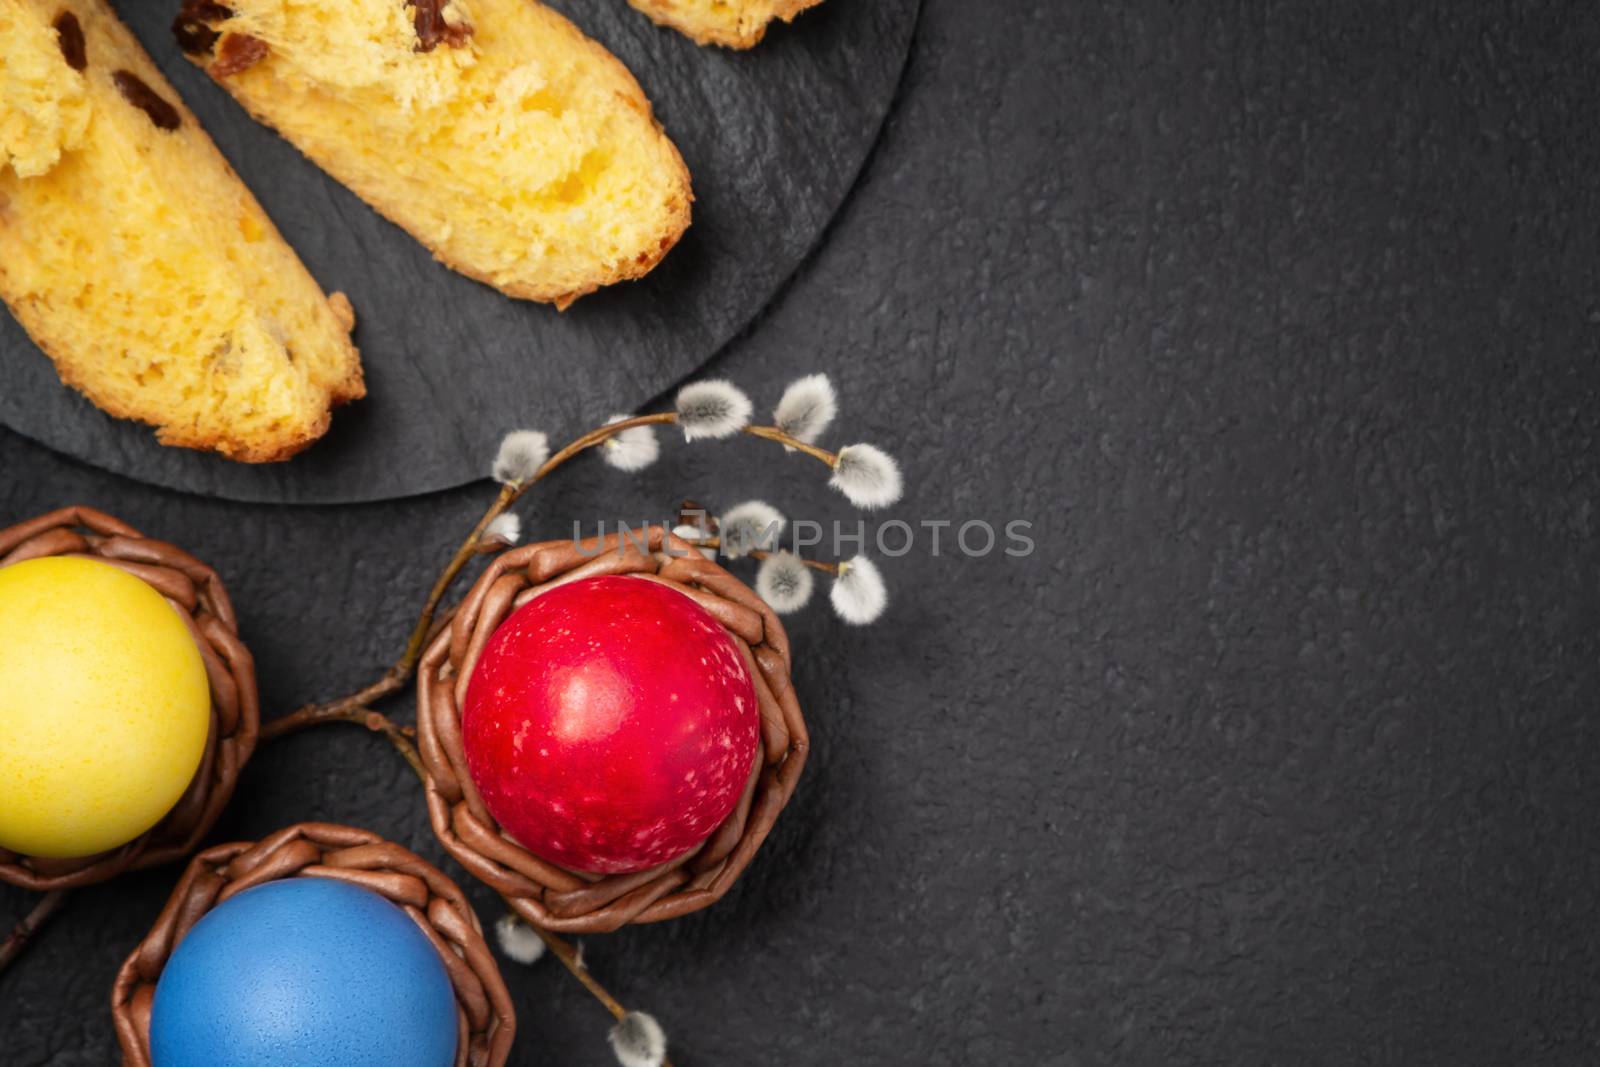 Painted Easter eggs in wicker coasters, pieces of Easter cake on a cutting board on a dark table - traditional Easter breakfast, top view, flat lay.